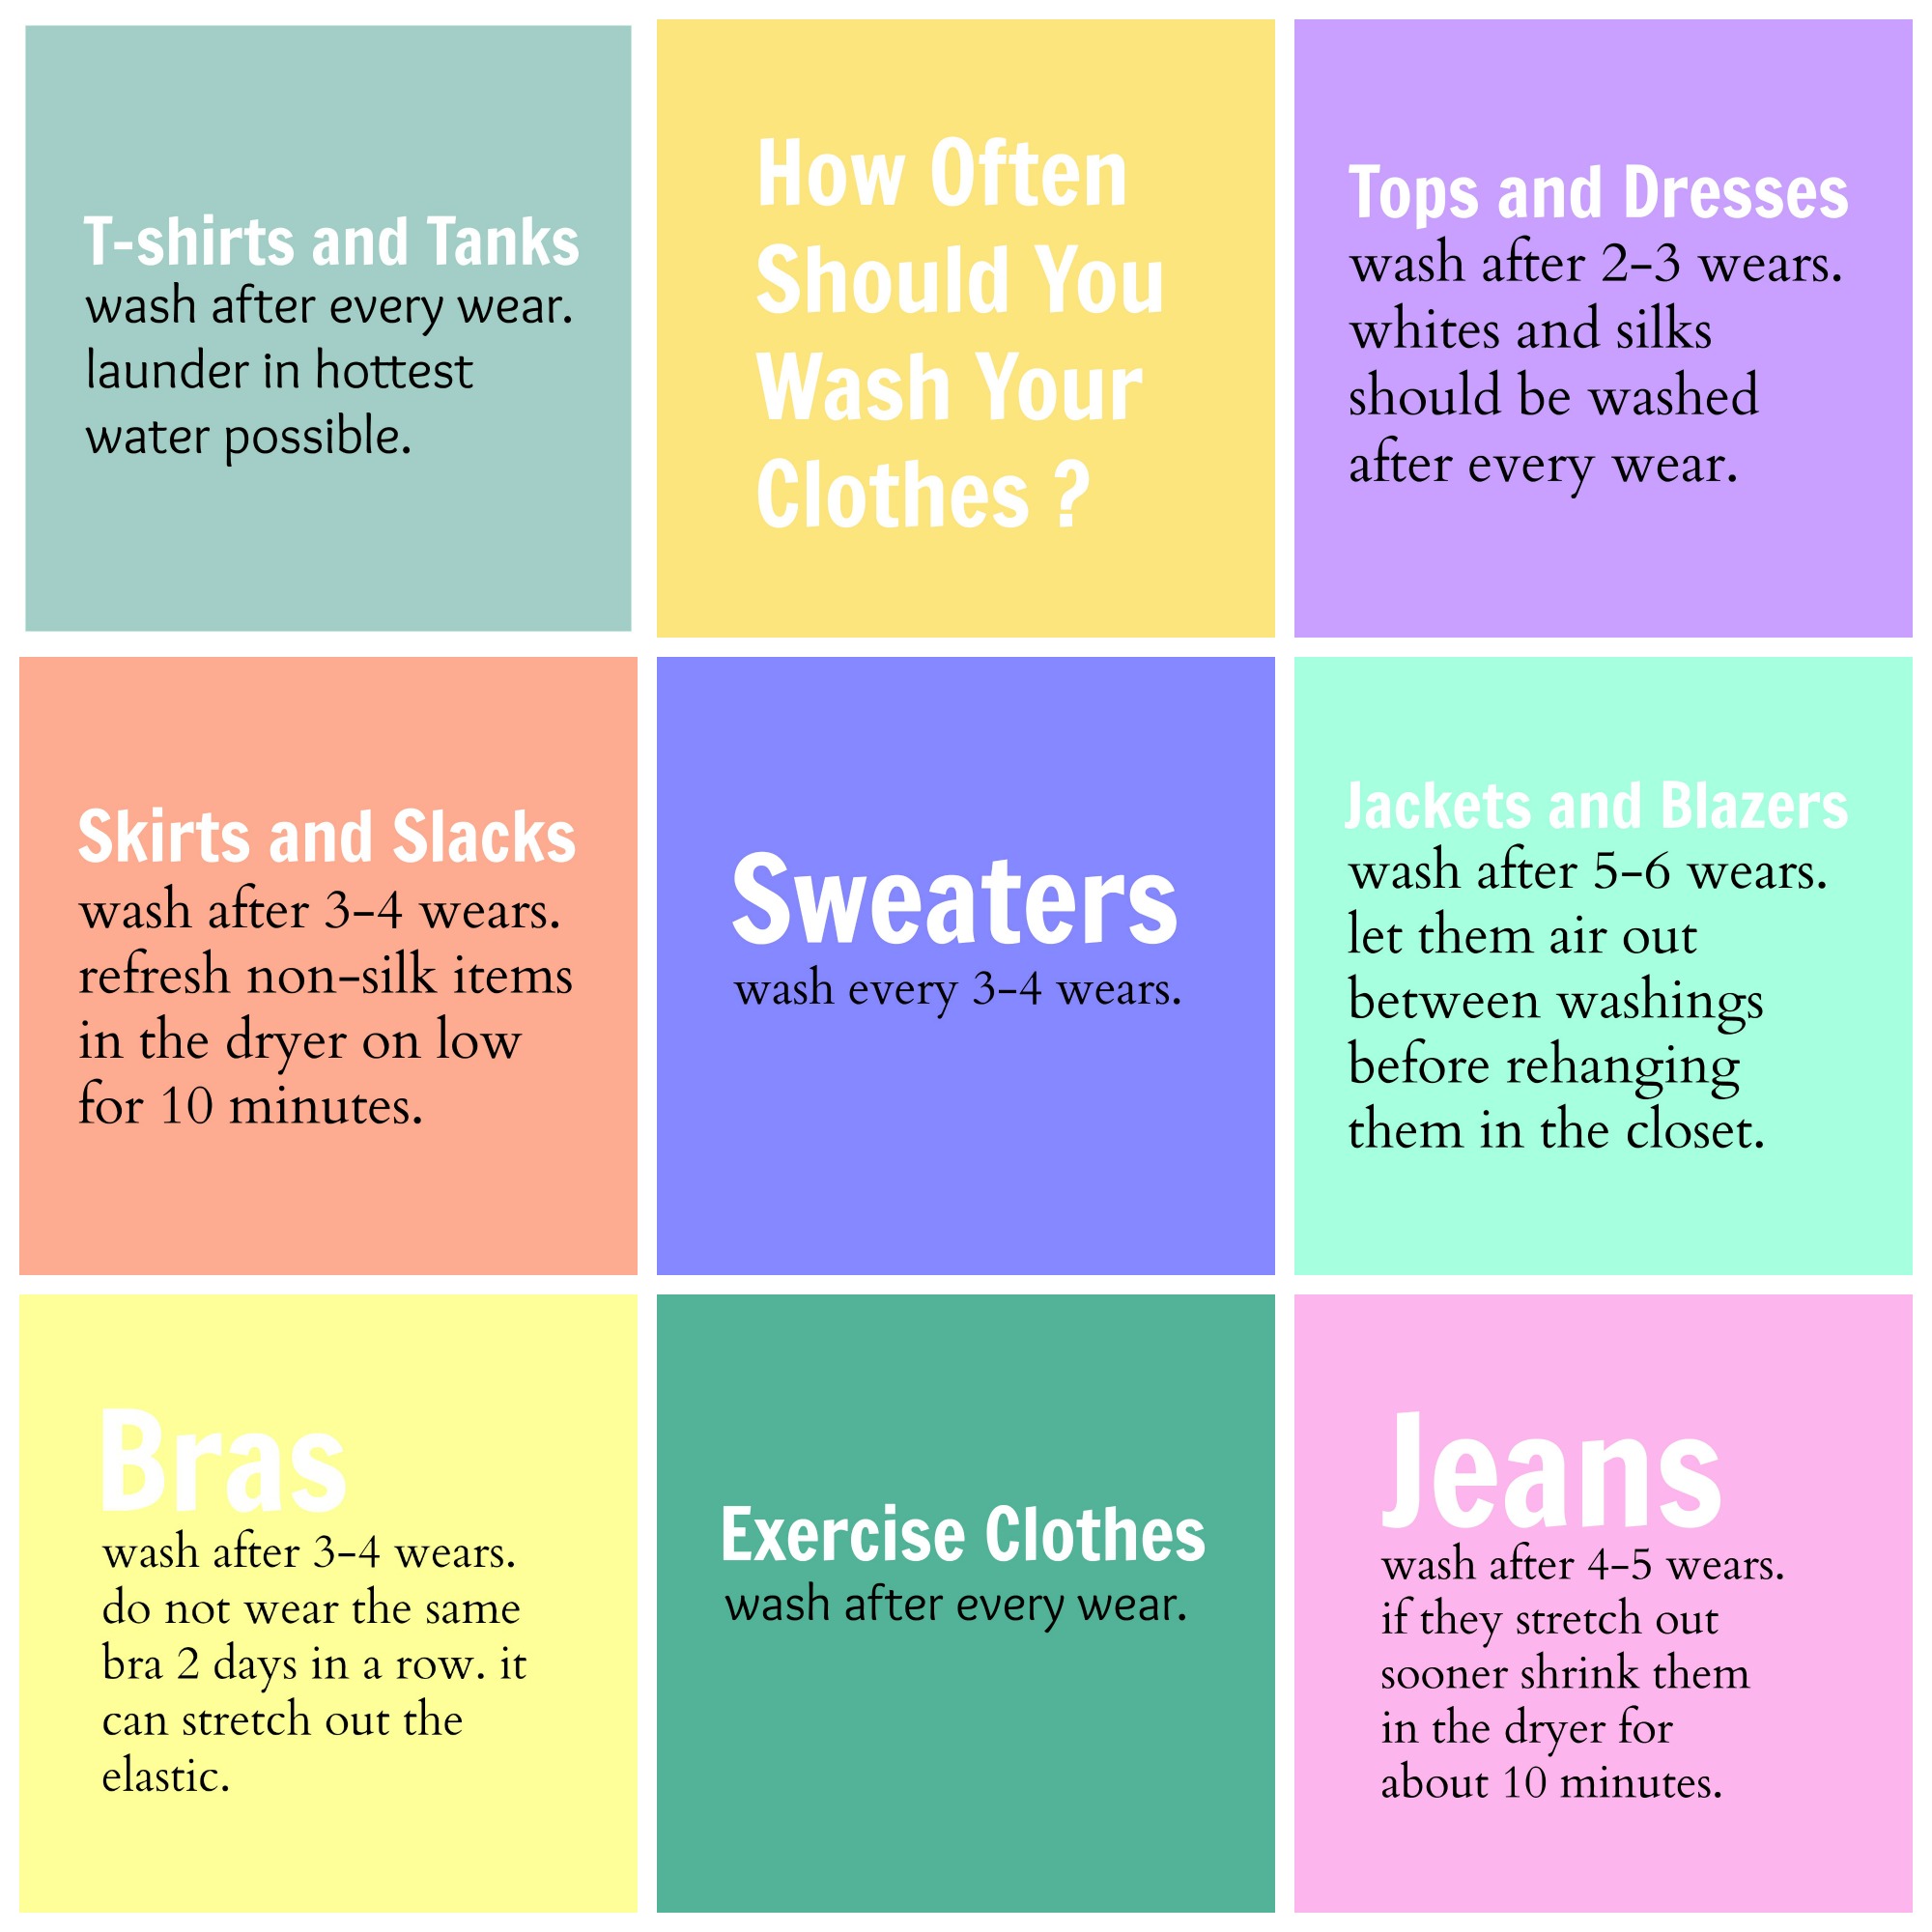 How Often Should You Wash Your Clothes? - Organize and ...